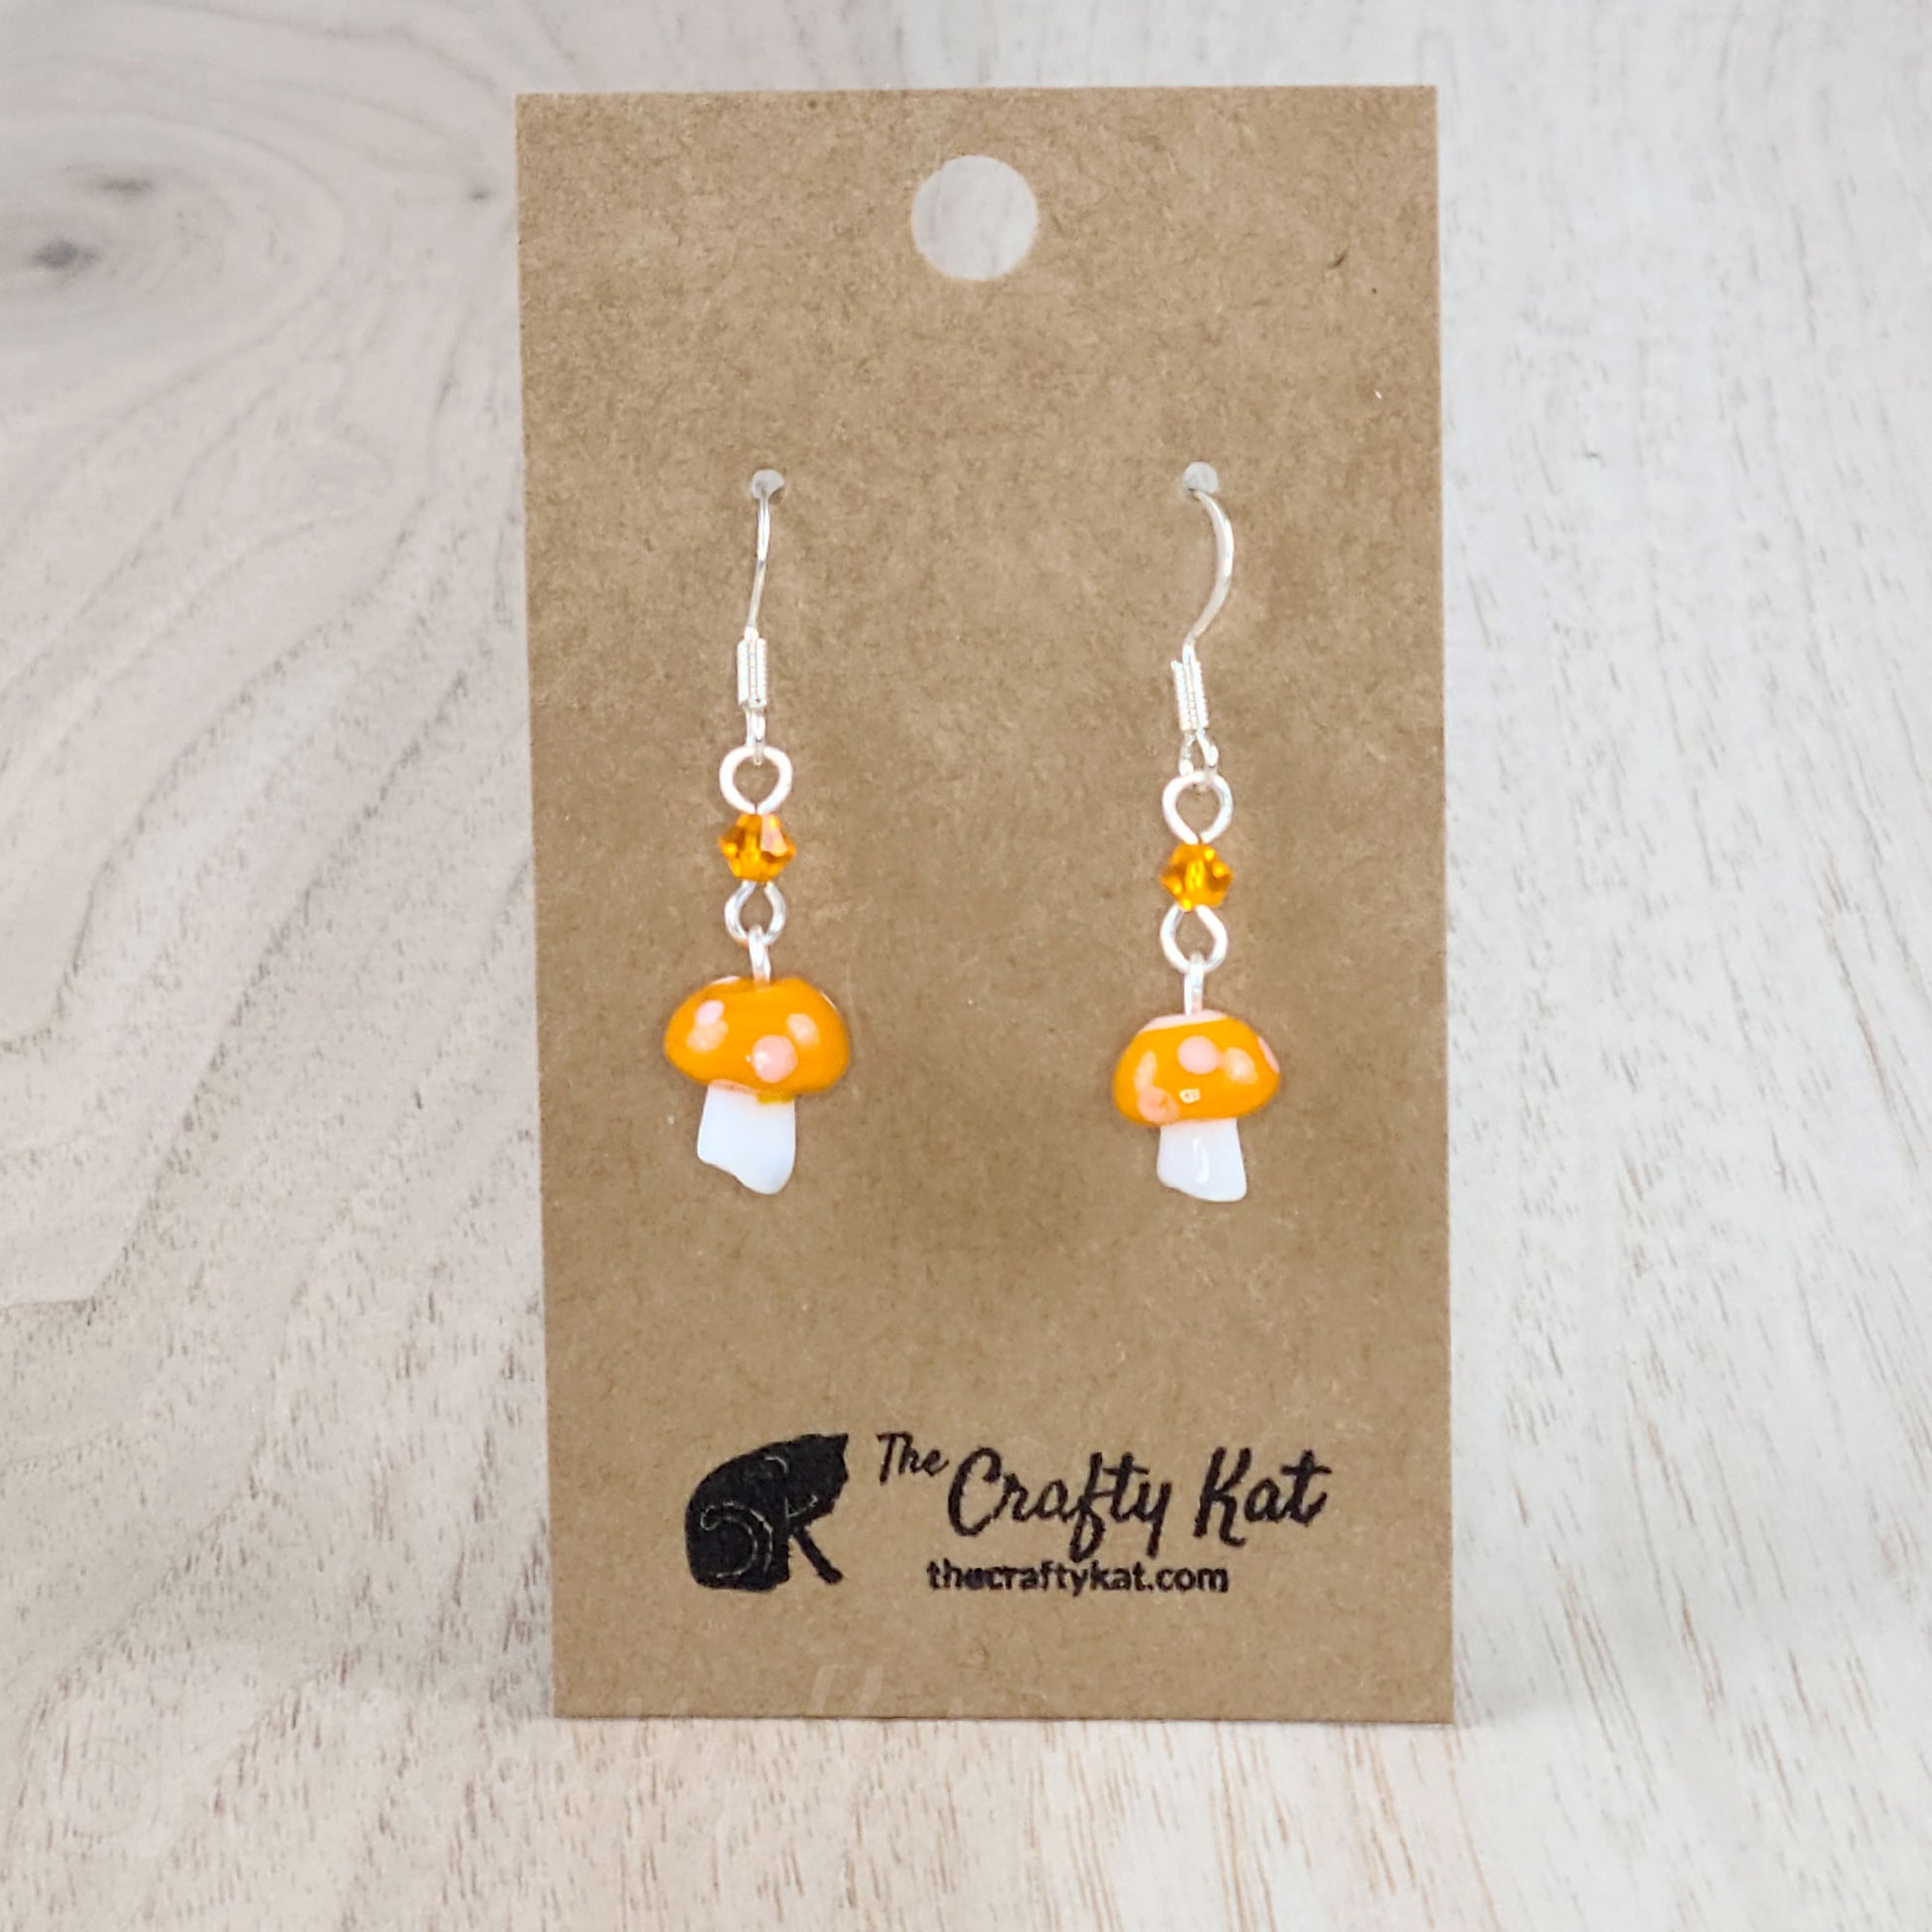 Mushroom-shaped tiered earrings made of lampwork and pressed glass beads with silver-plated base metal fittings. These mushrooms are orange with white spots.